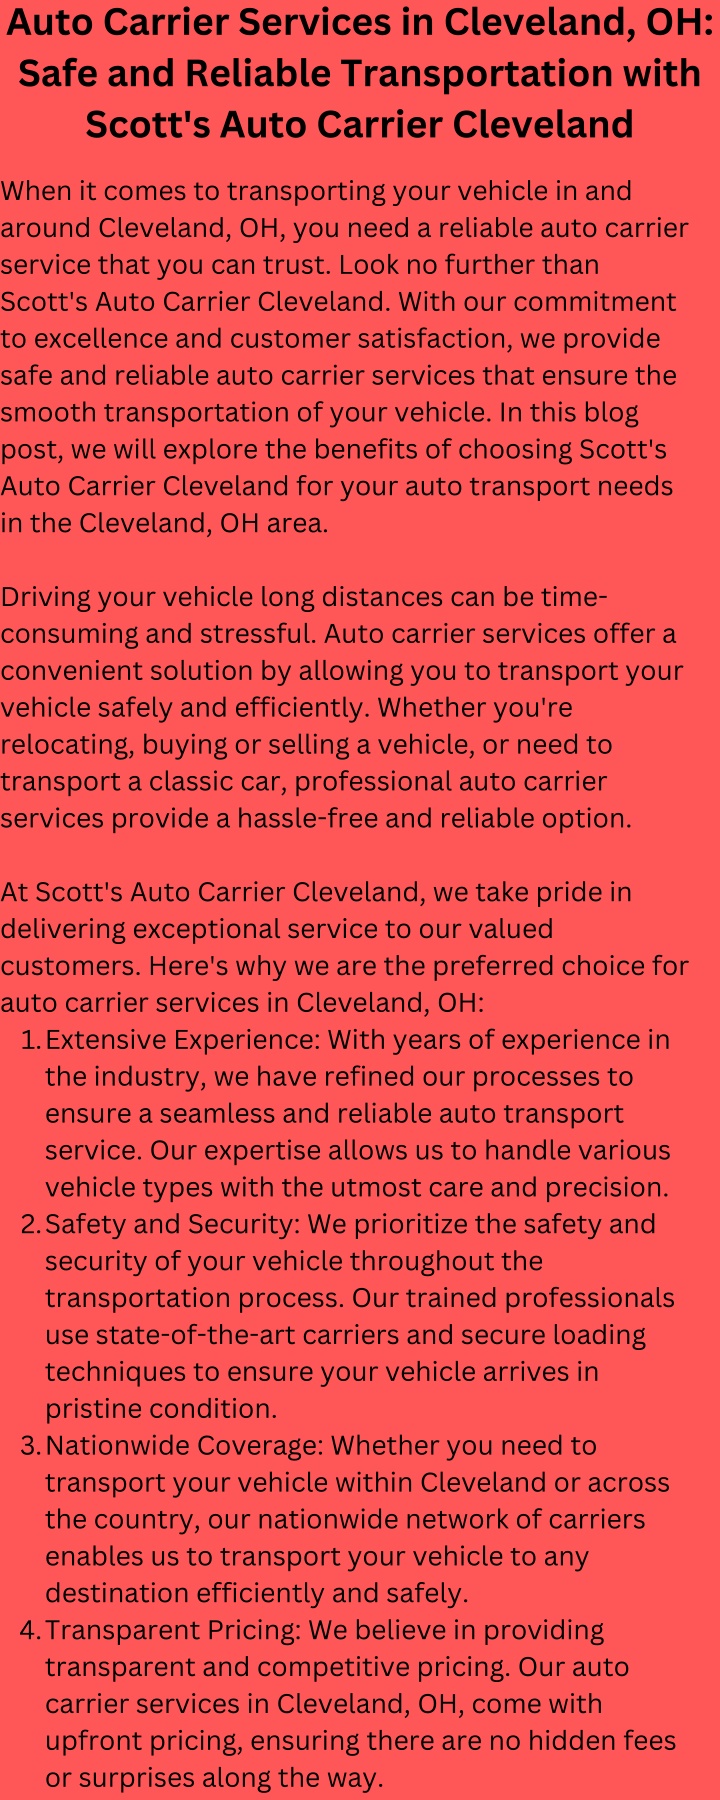 auto carrier services in cleveland oh safe